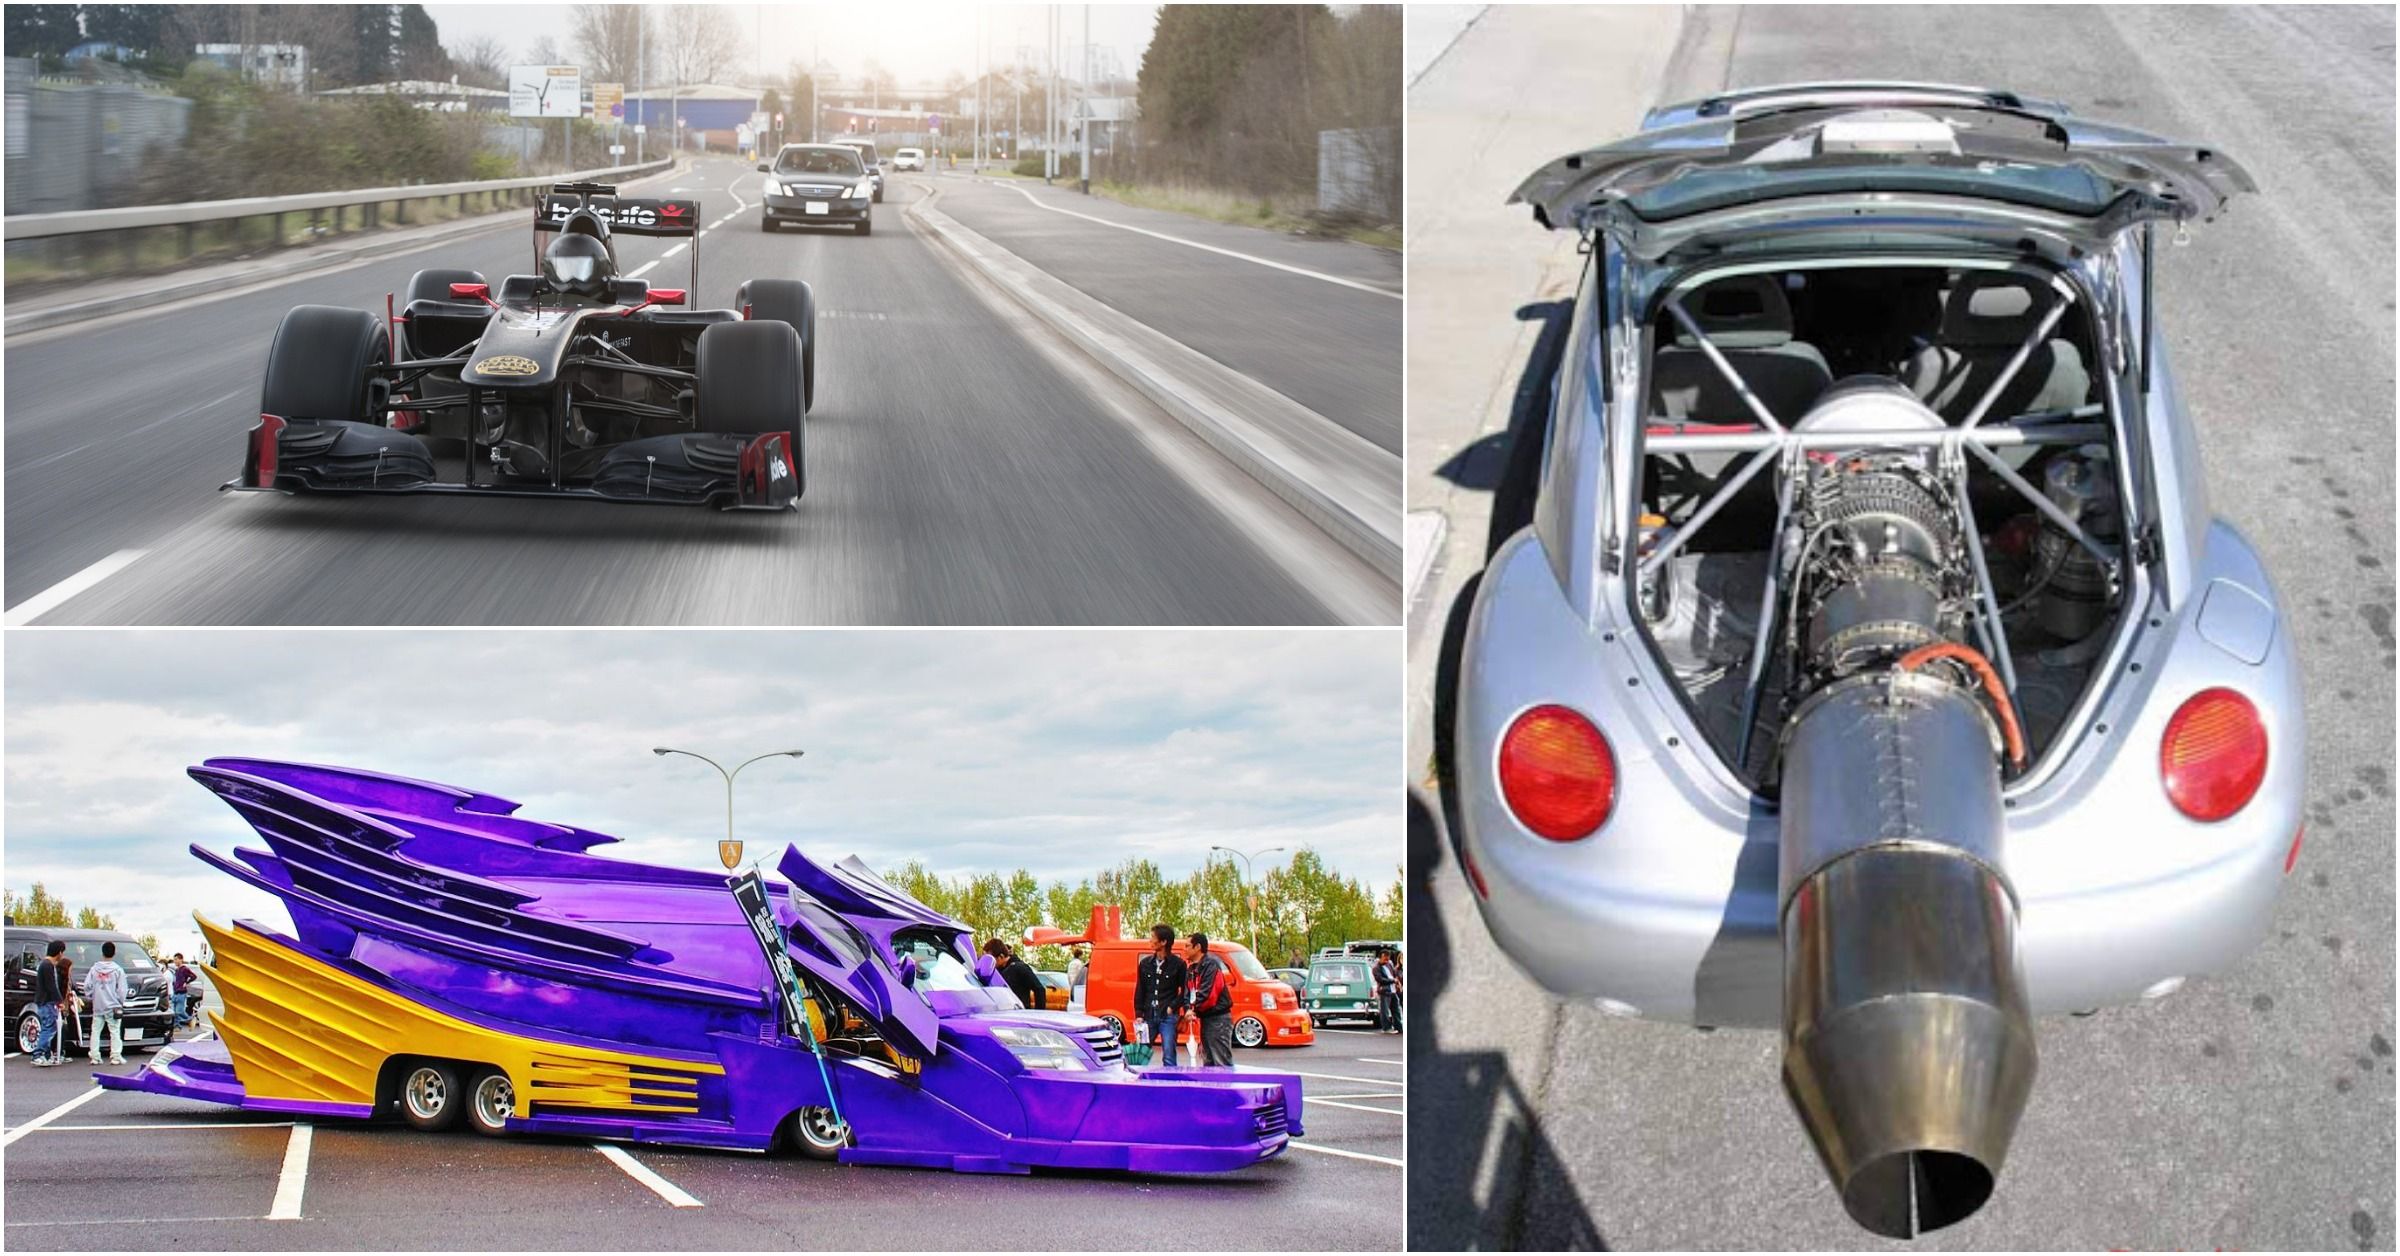 15 Strangest Modified Cars People Drive That Are Street Legal